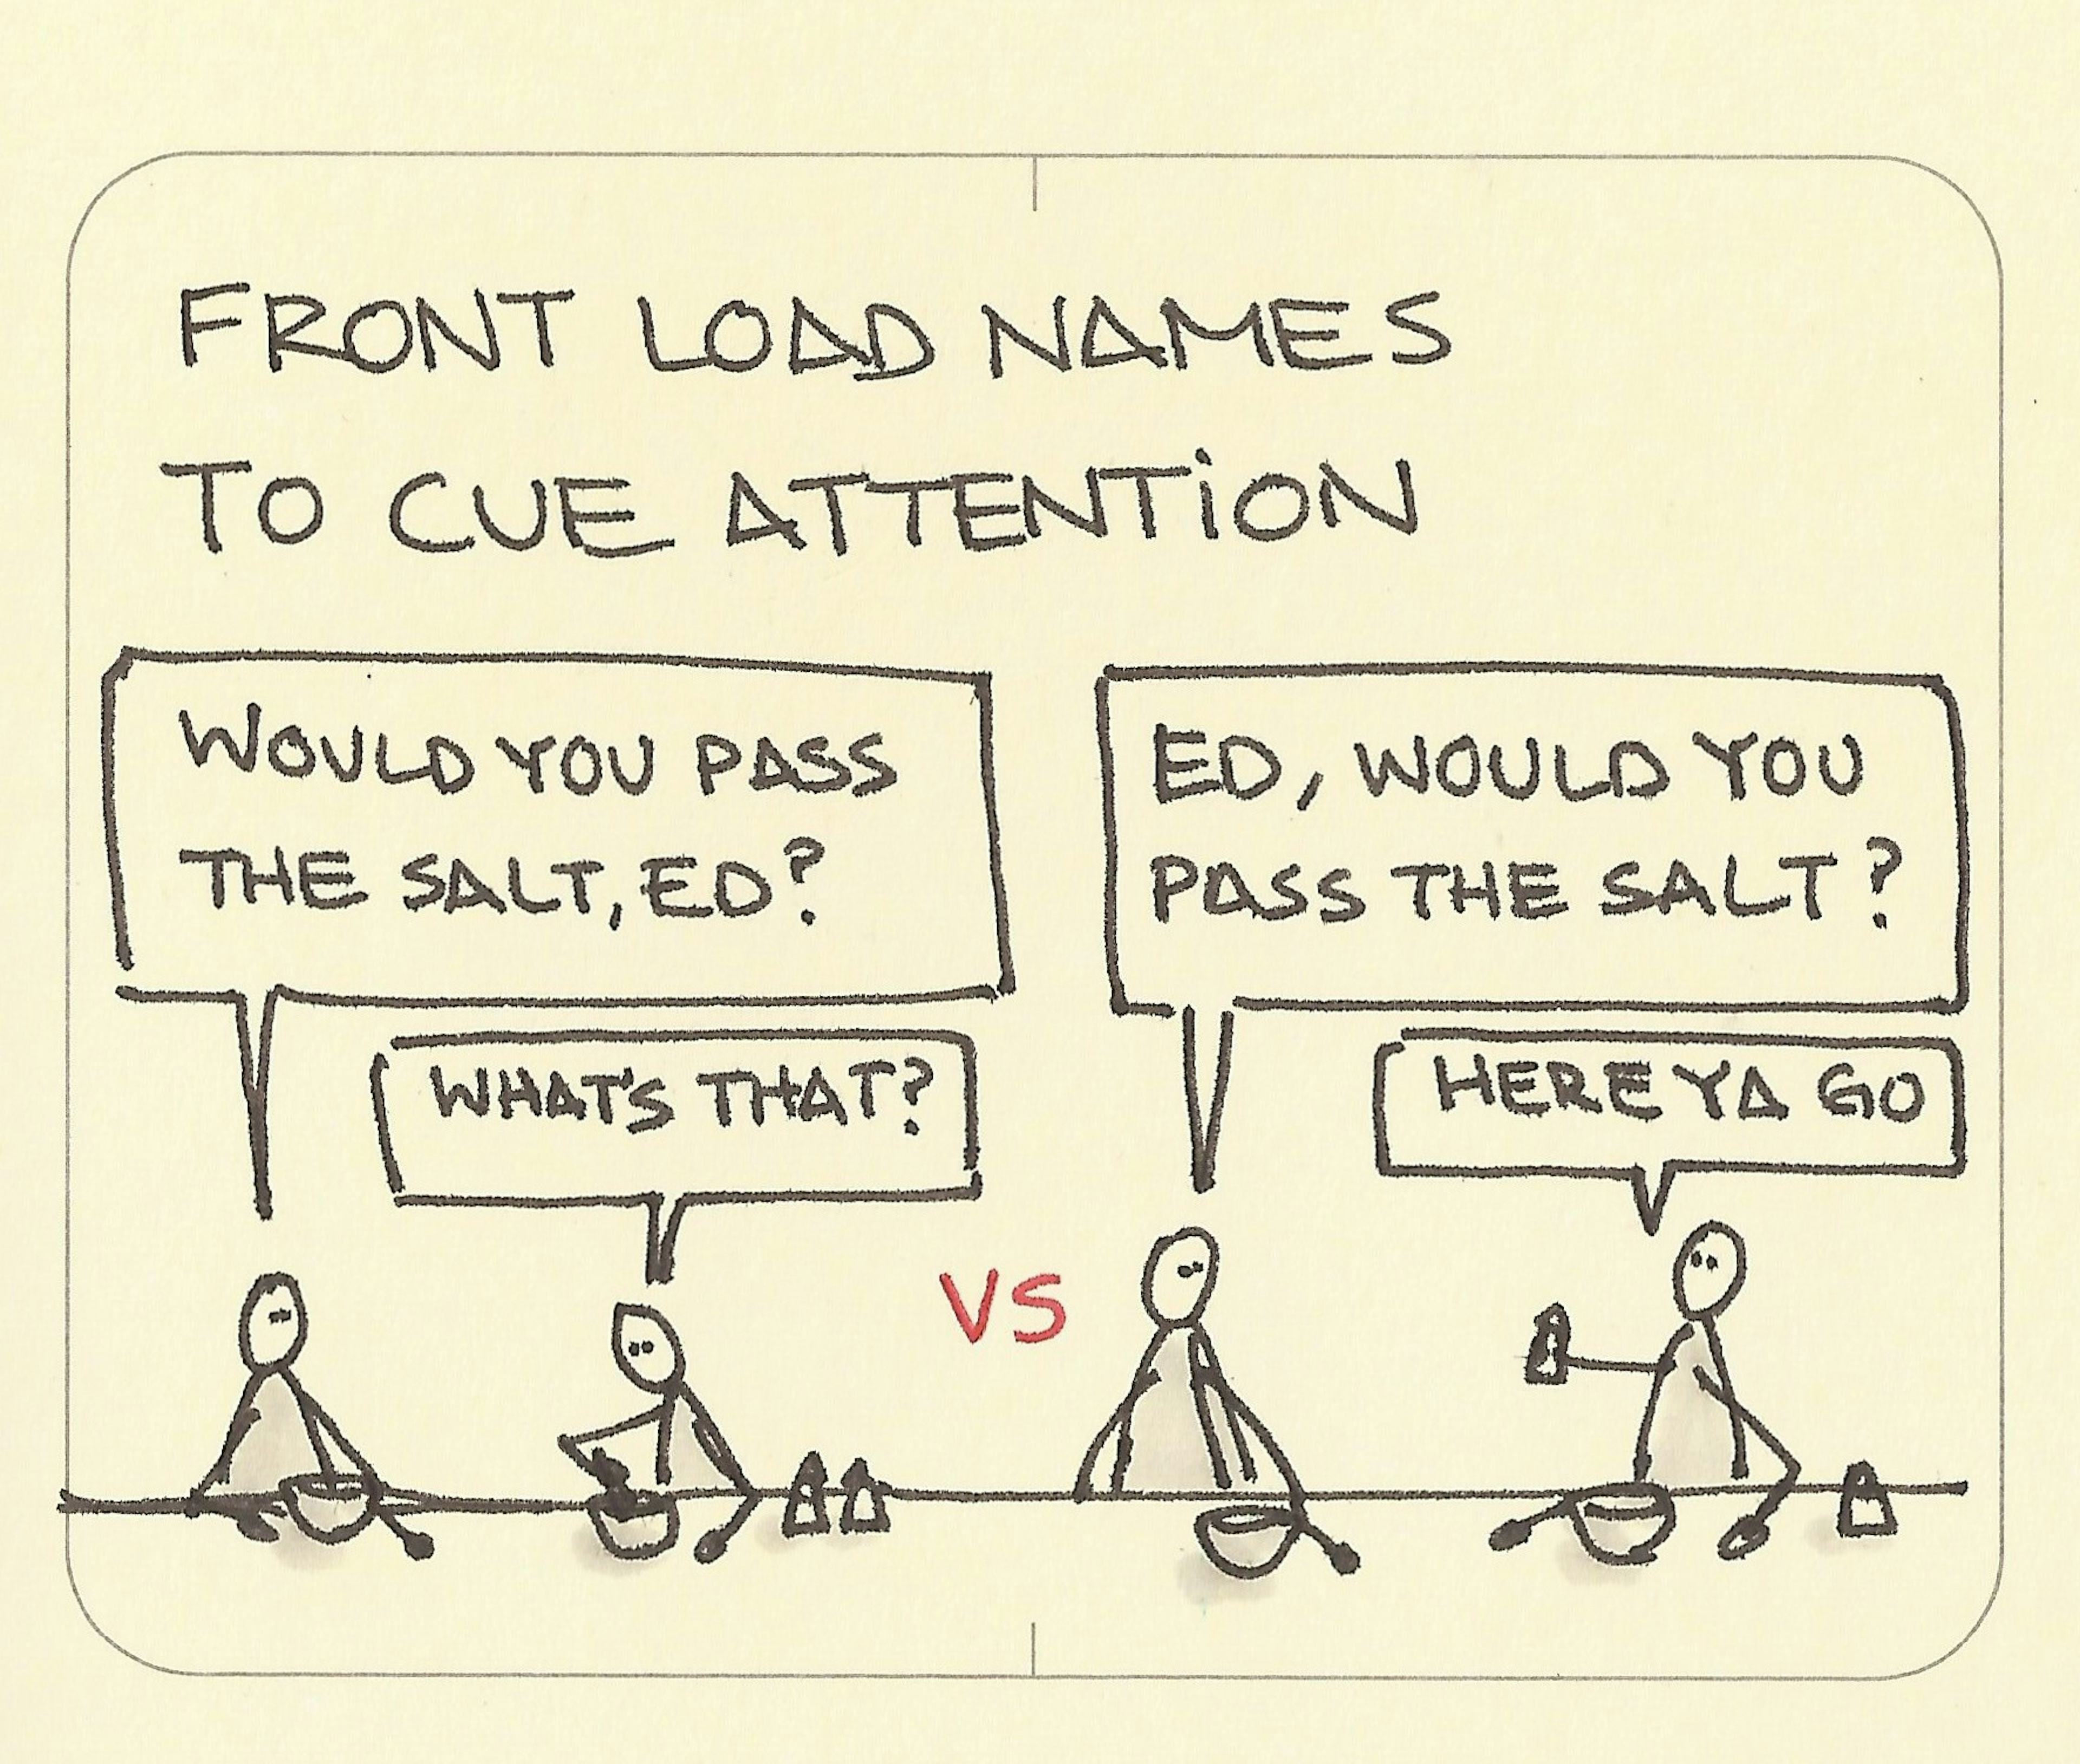 Ed happily passes the salt when cued to listen to the question with his name upfront: "Ed, would you pass the salt?"